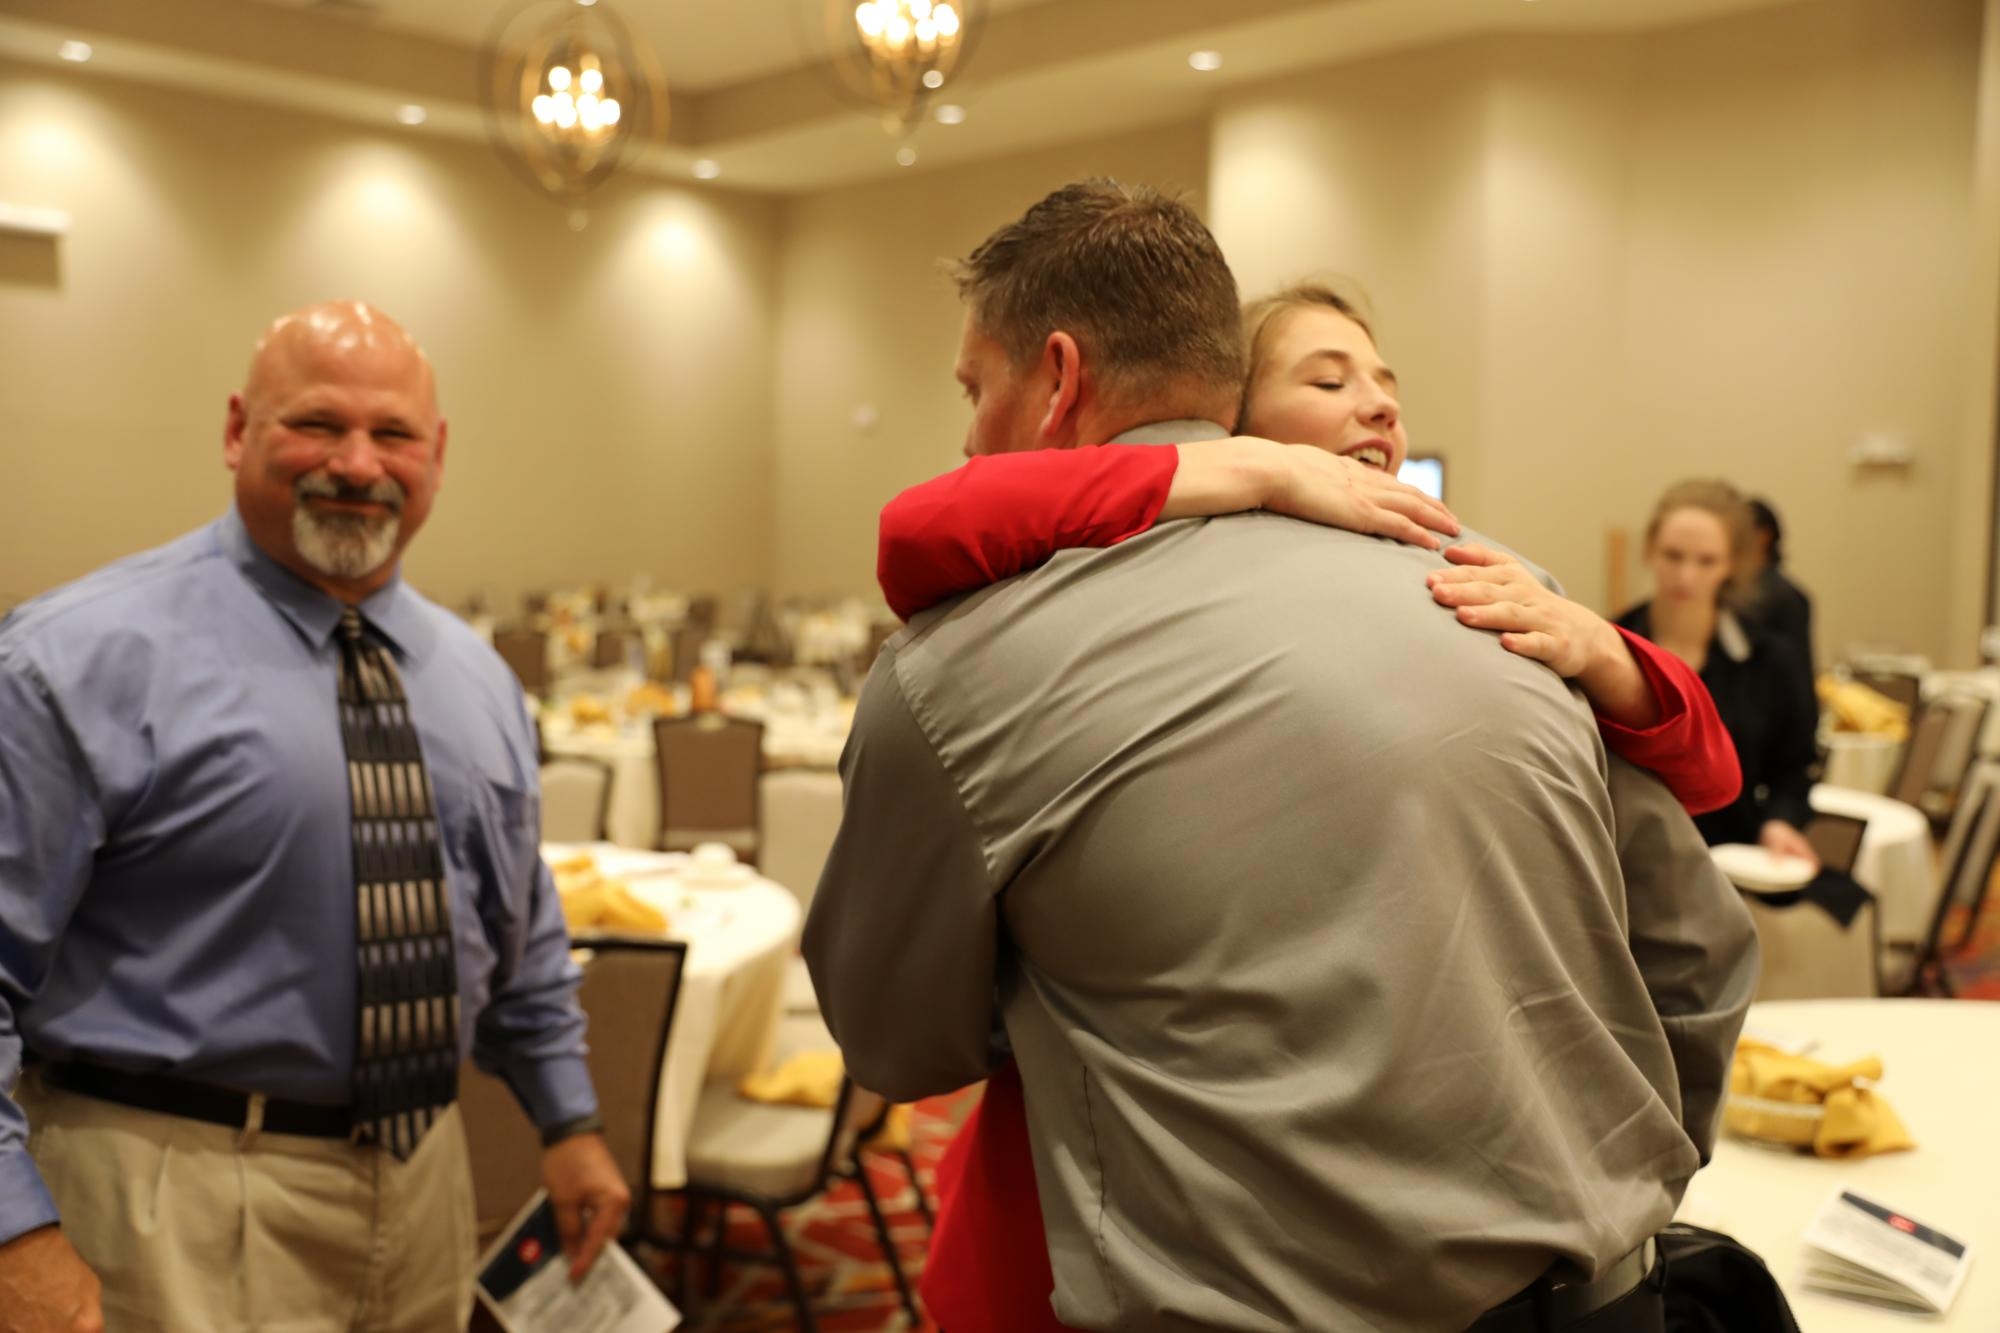 Sarah hugging her former Discovery wrestling coaches